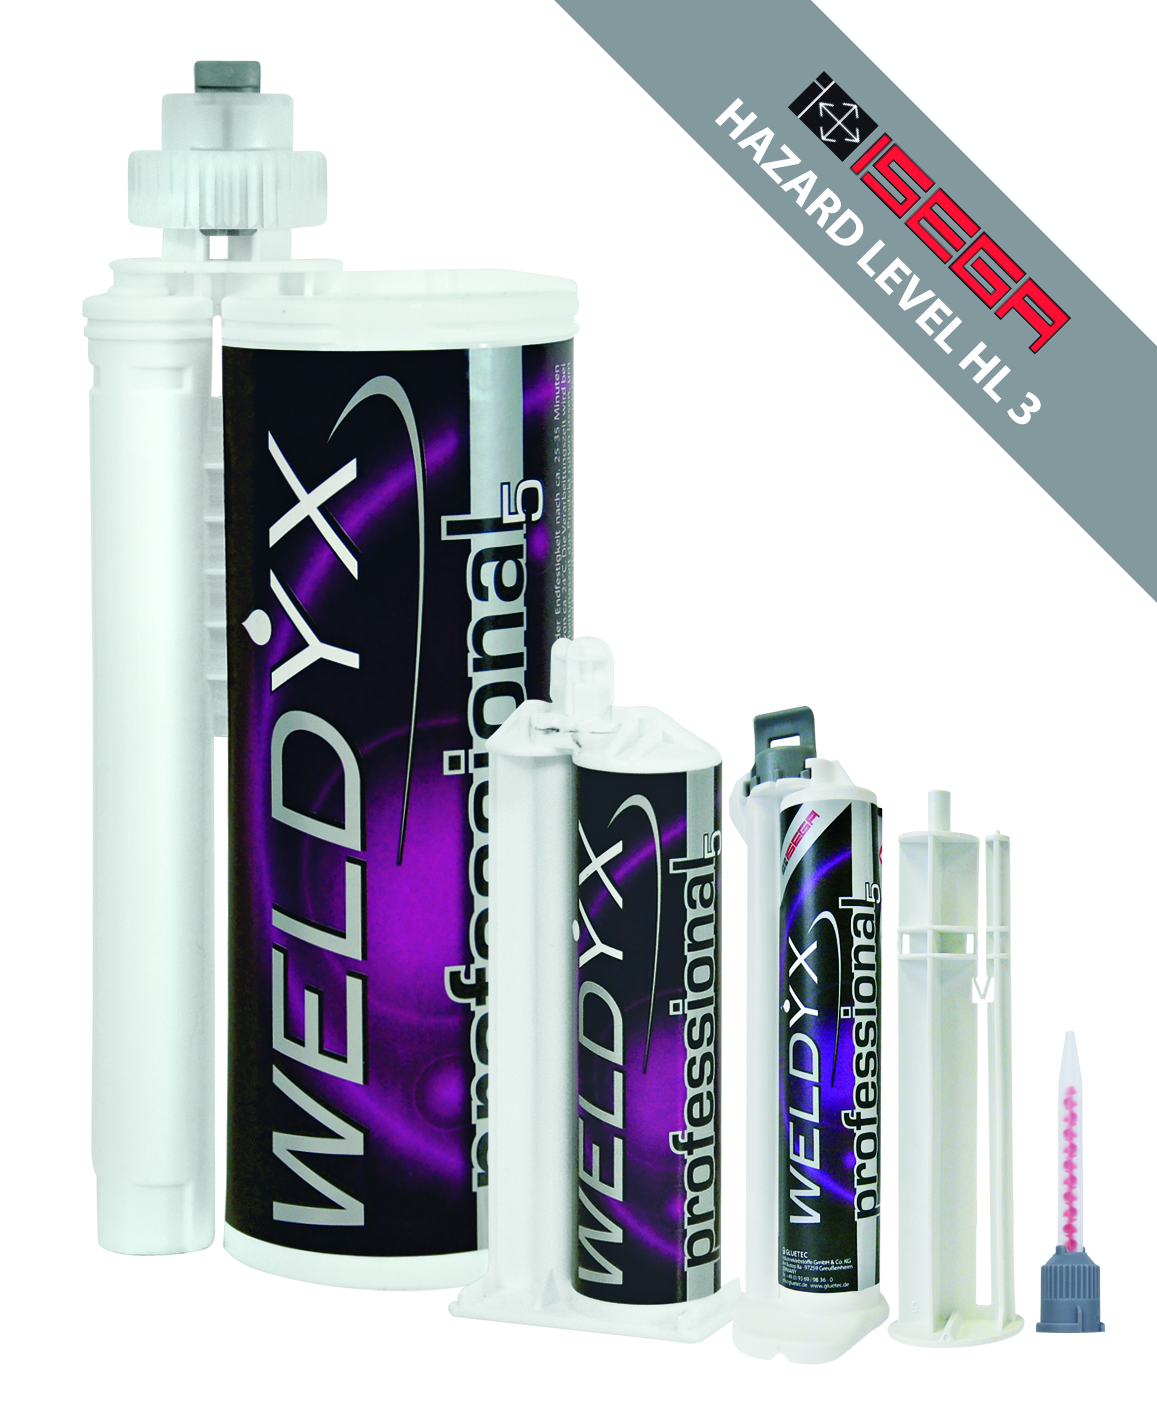 WELDYX PROFESSIONAL 5: Certified High-performance adhesive with 5 min open time, Hazard Level 3